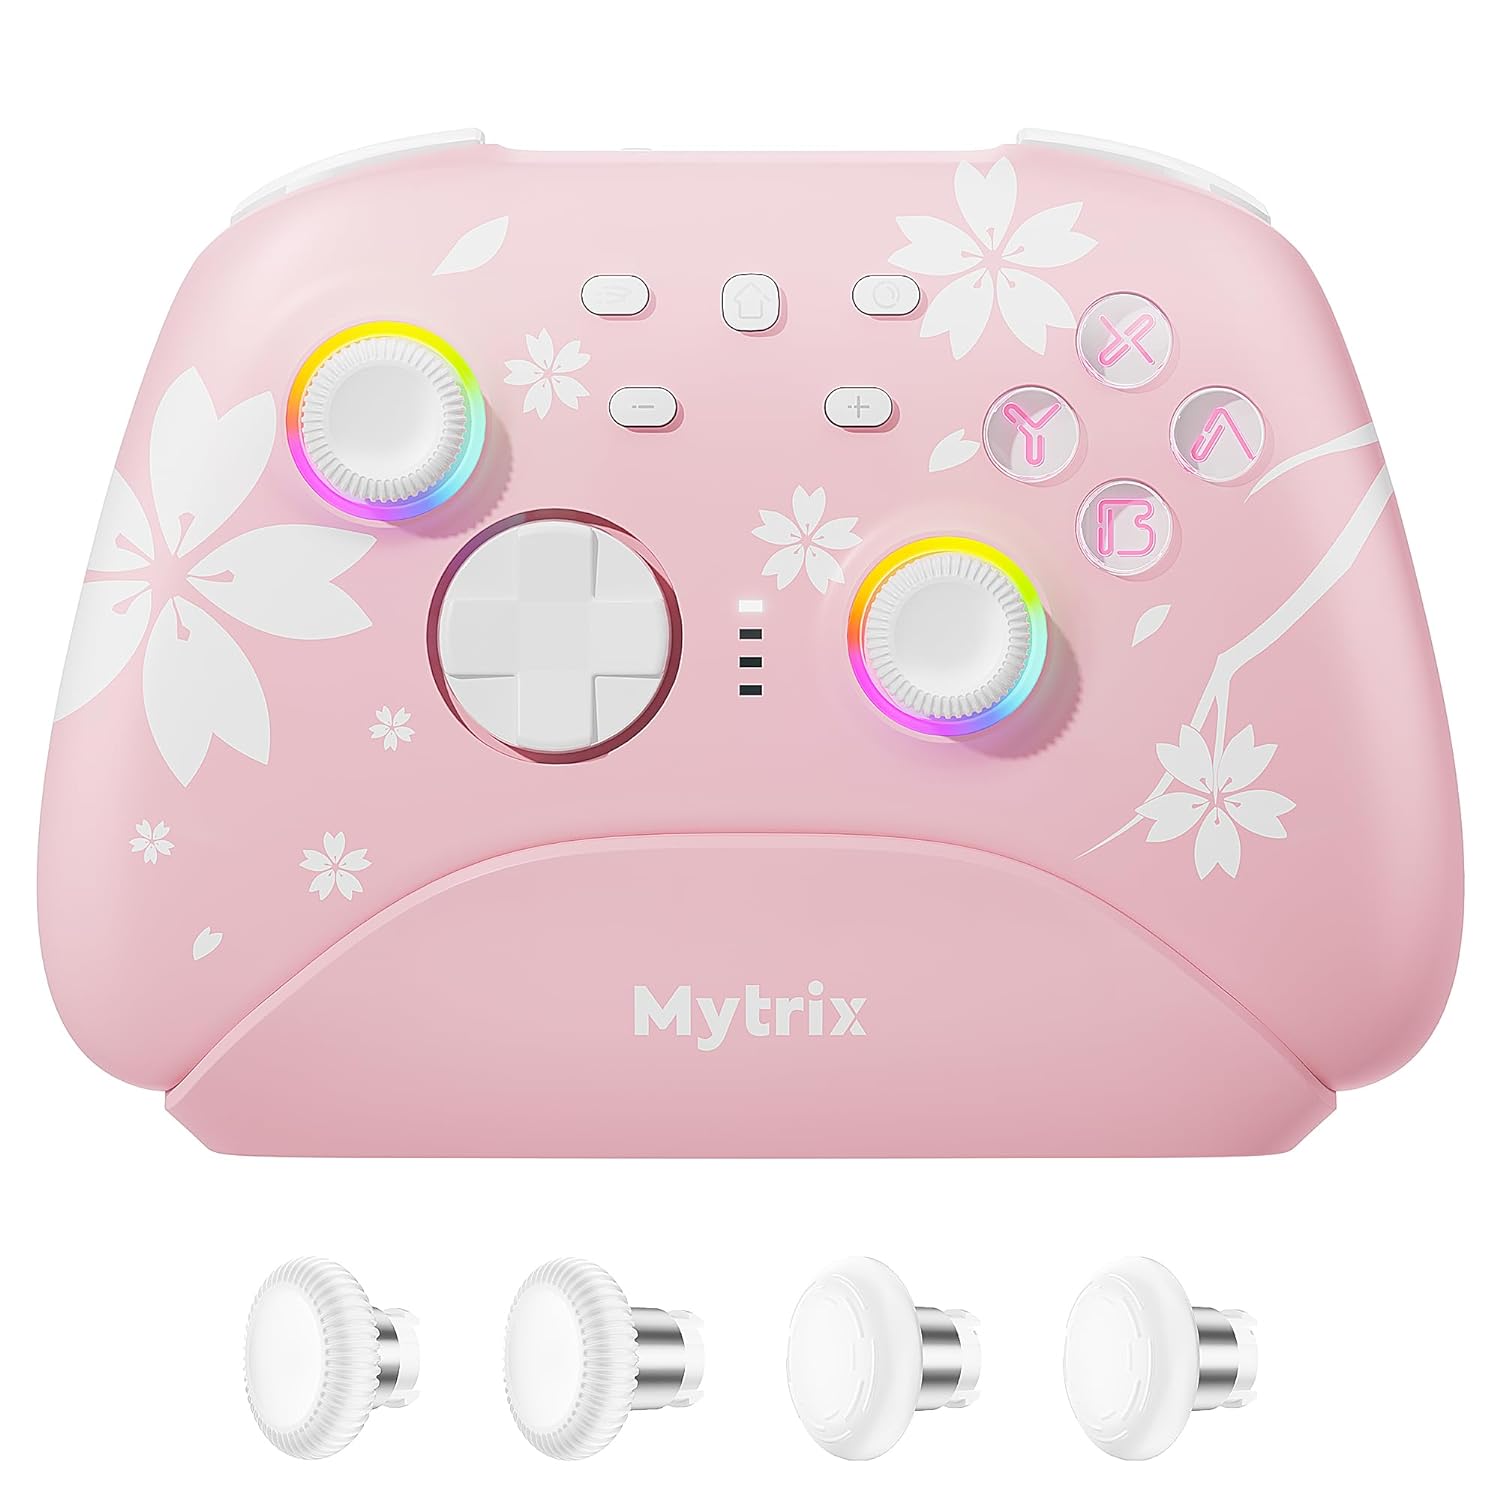 Mytrix Wireless Pro Controllers with Charging Dock, Sakura Pink